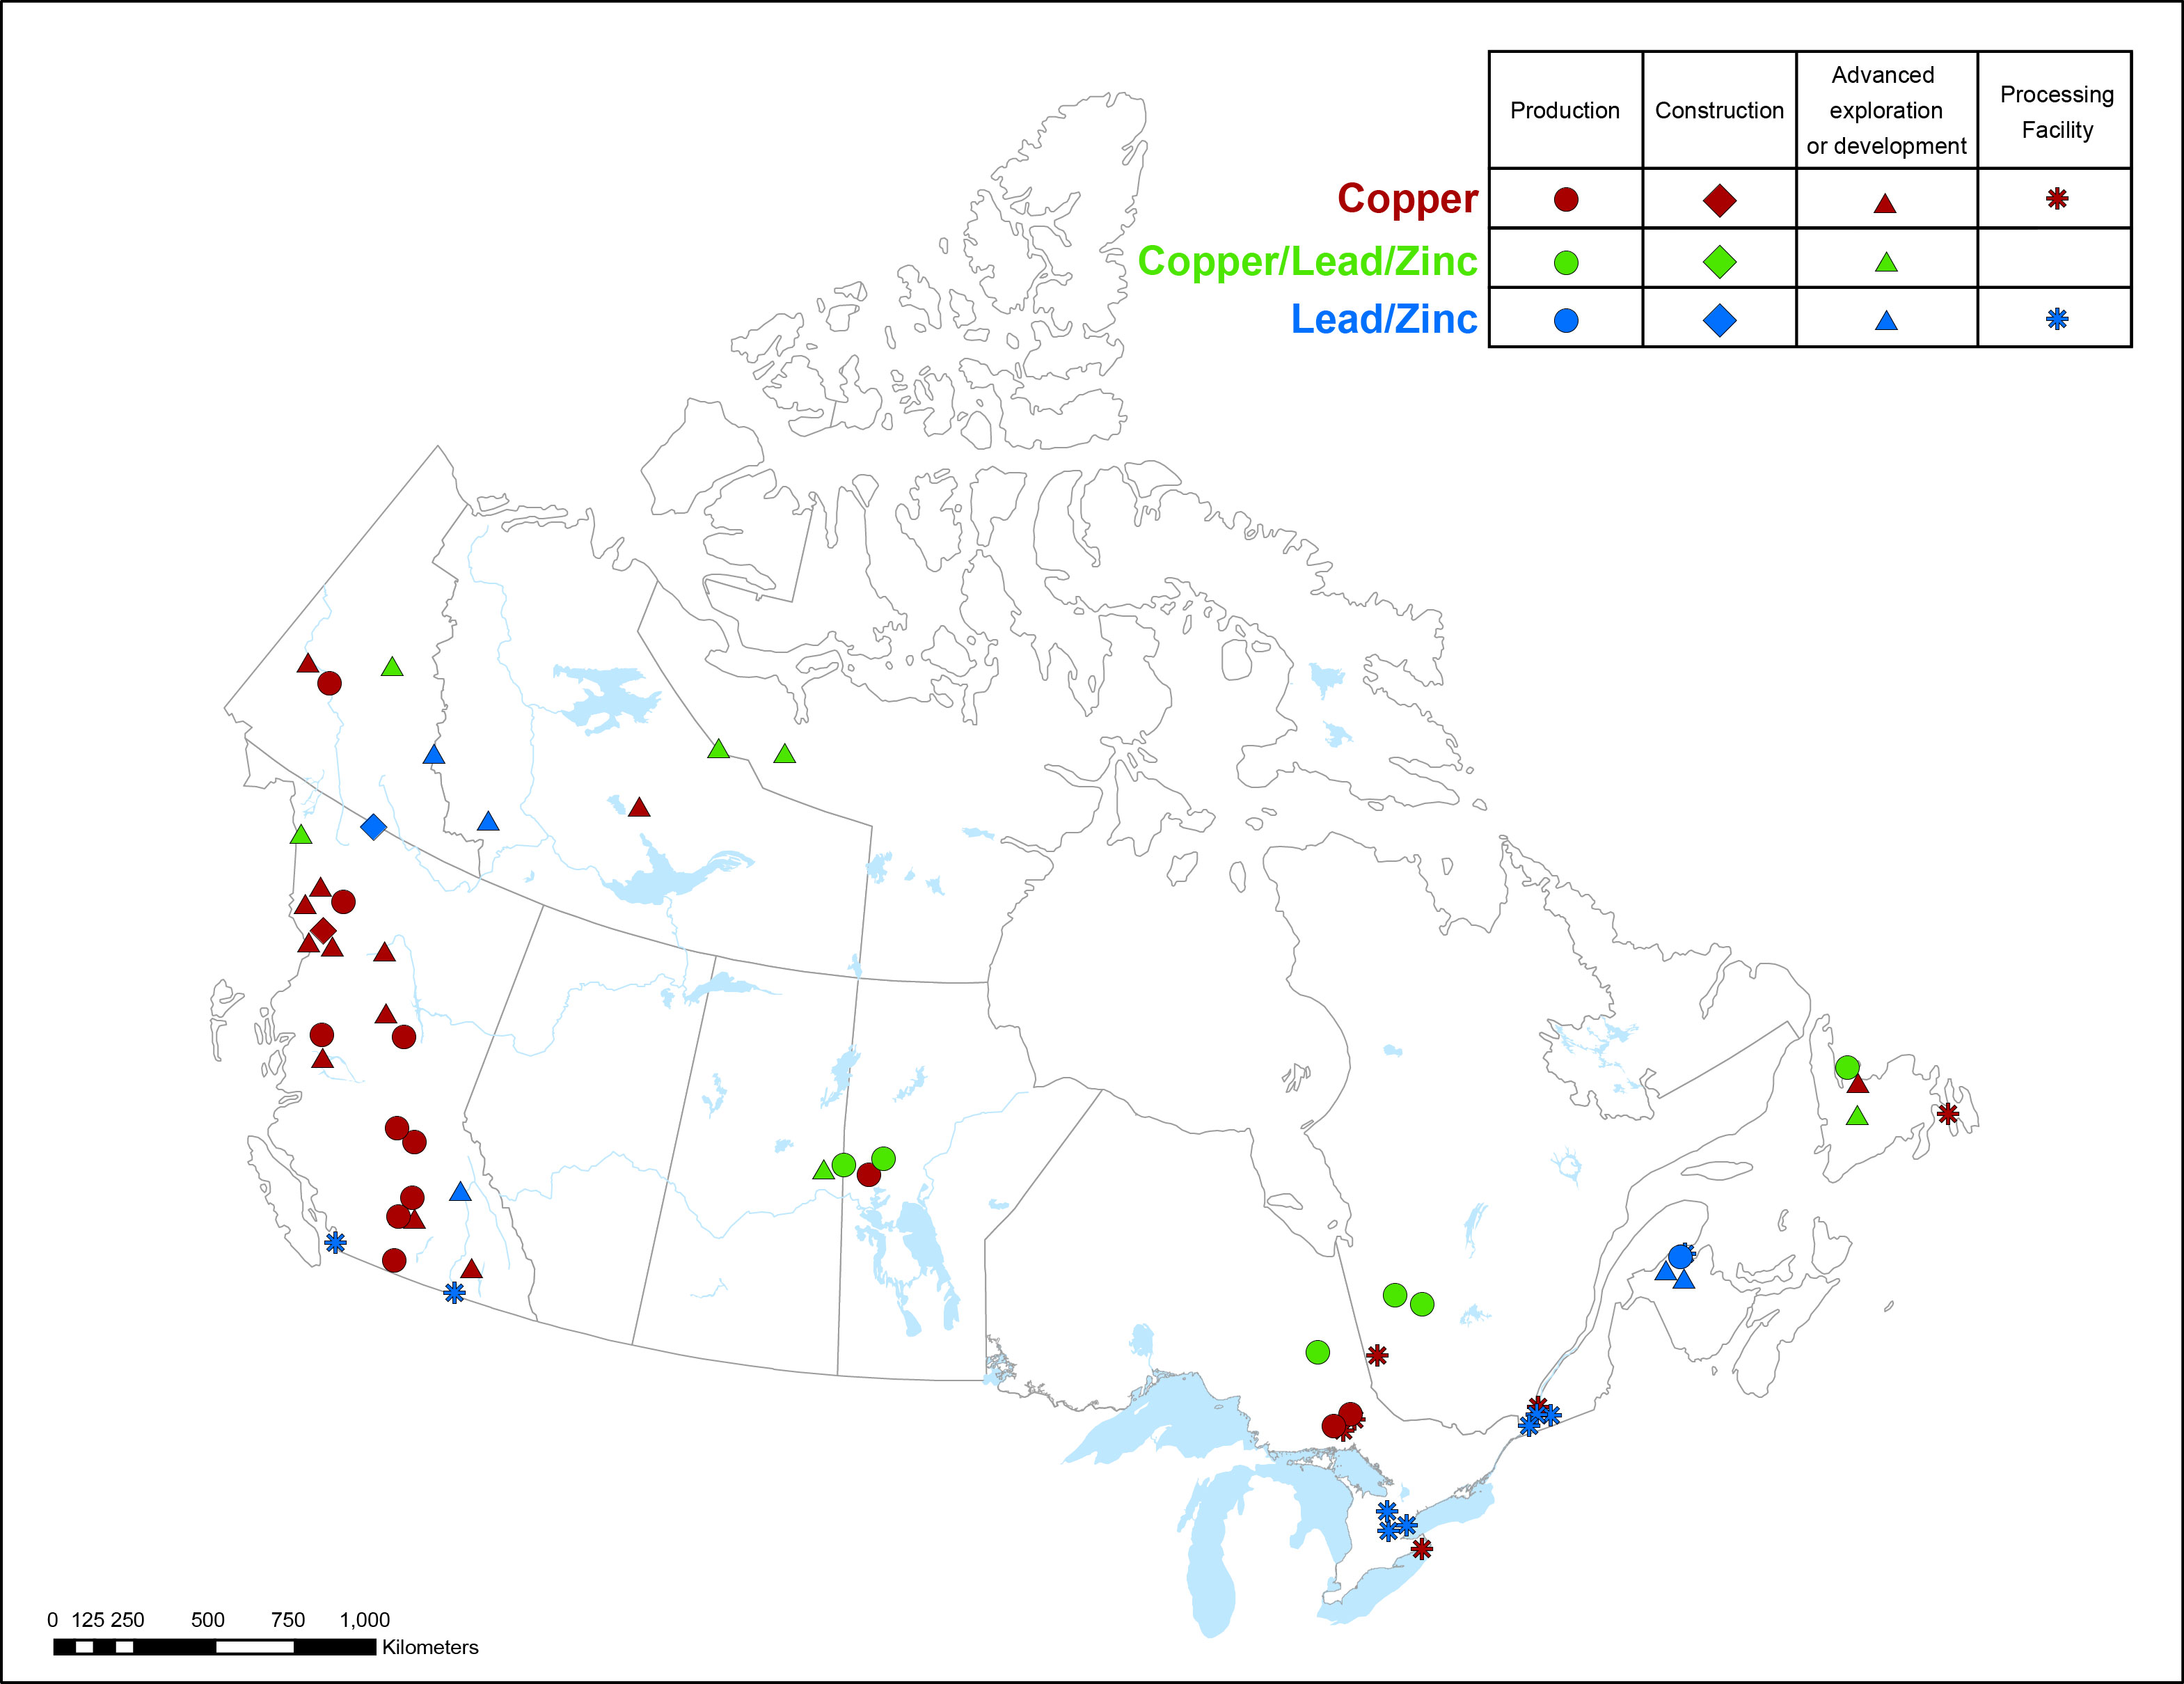 Figure 1 is a map of Canada displaying the geographic location of metal mines, smelters, and refineries 